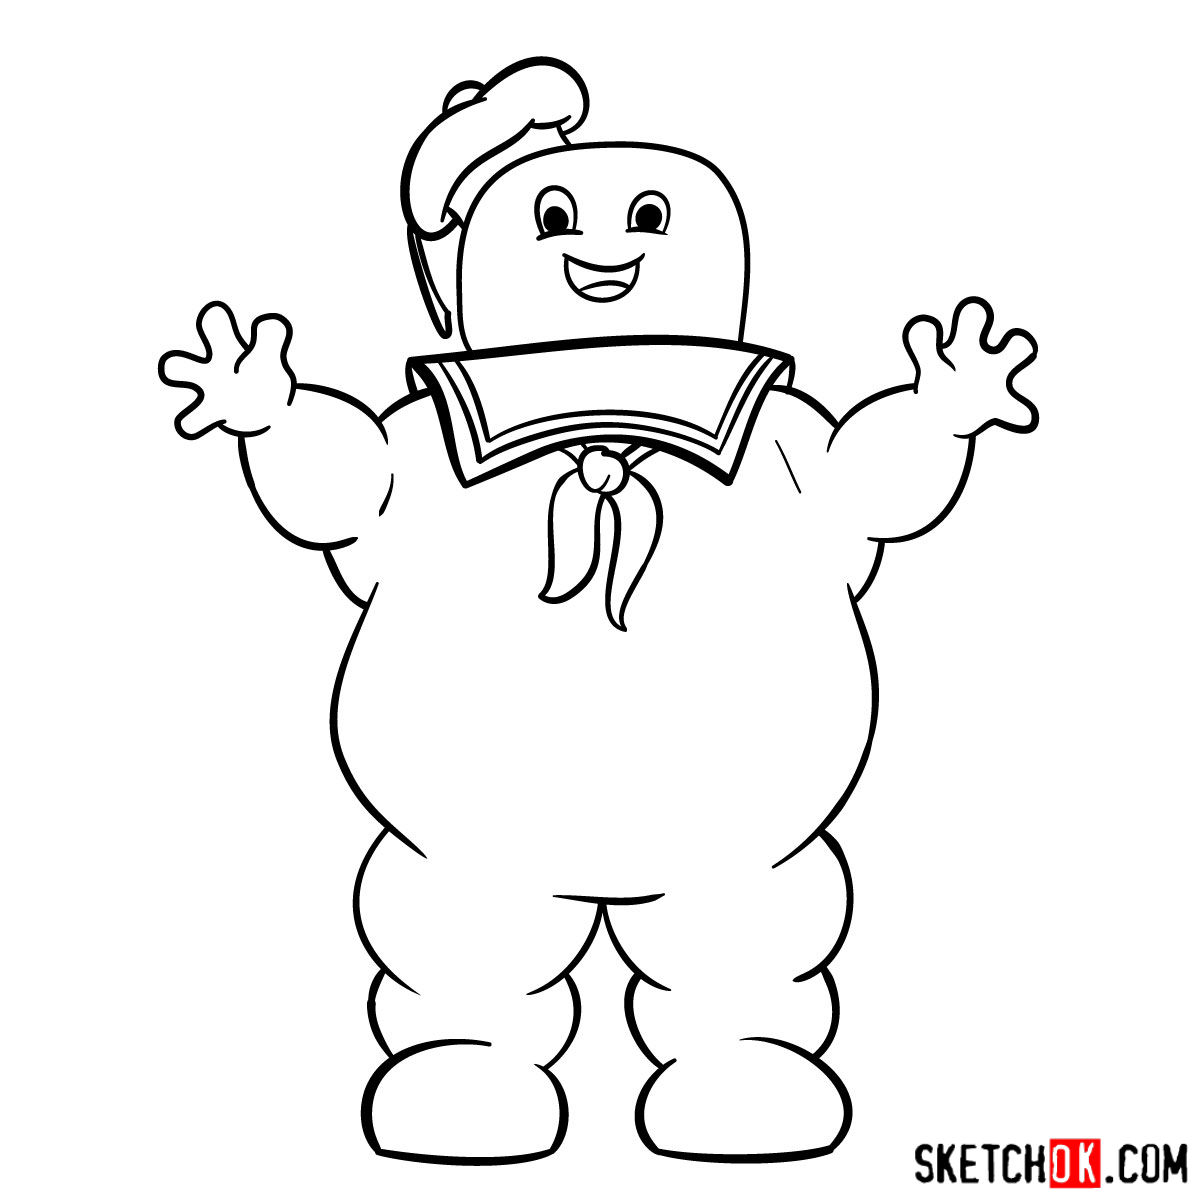 How to draw Stay Puft Marshmallow Man | Ghostbusters - Sketchok